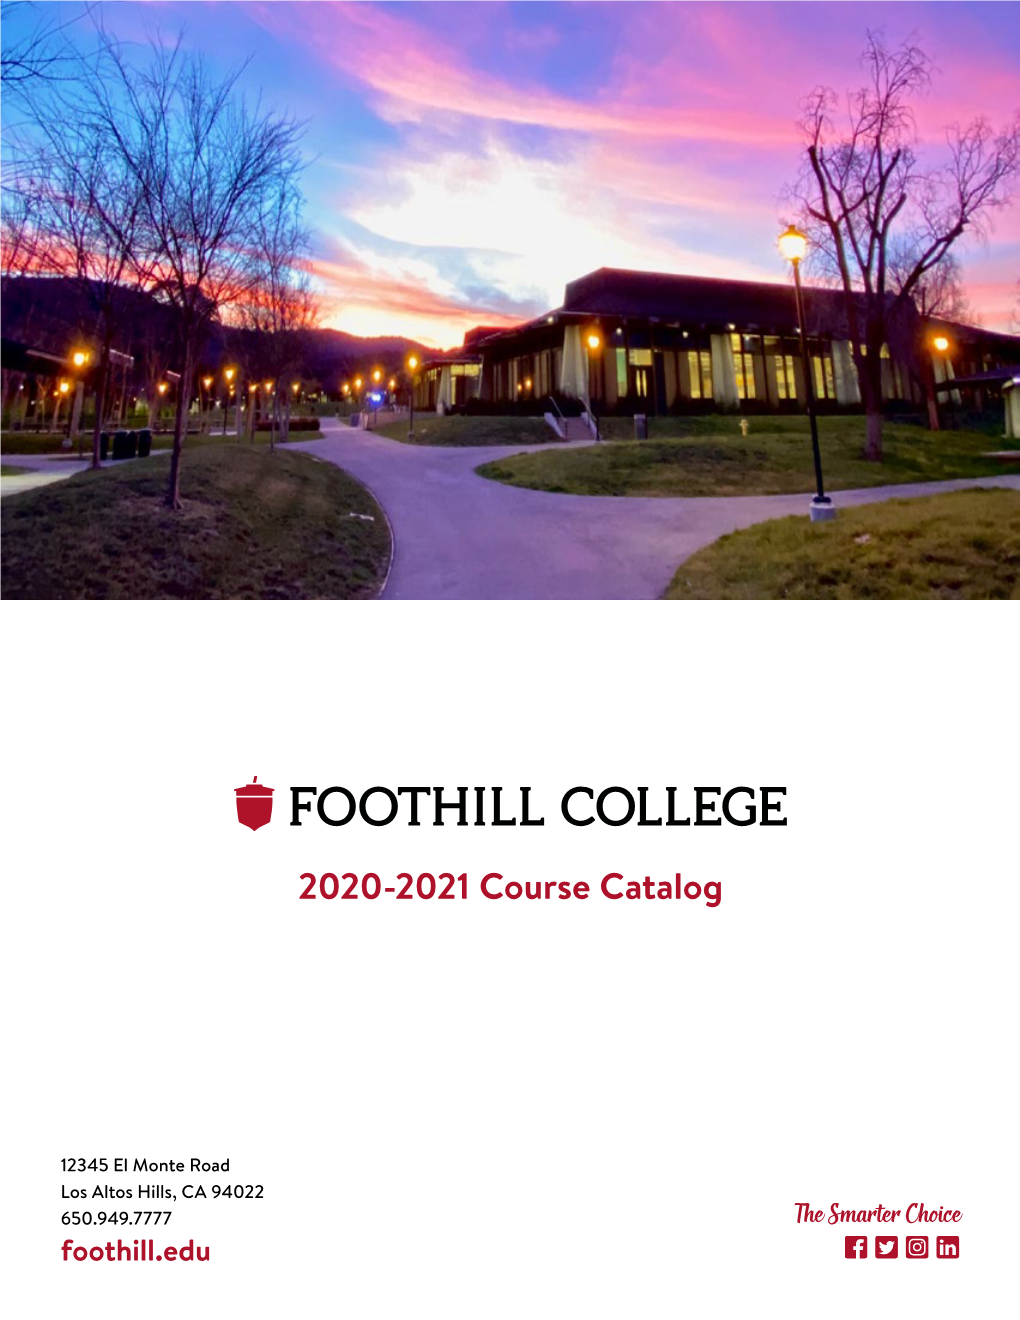 Foothill College 2020-2021 Catalog: Overview & Academic Policies